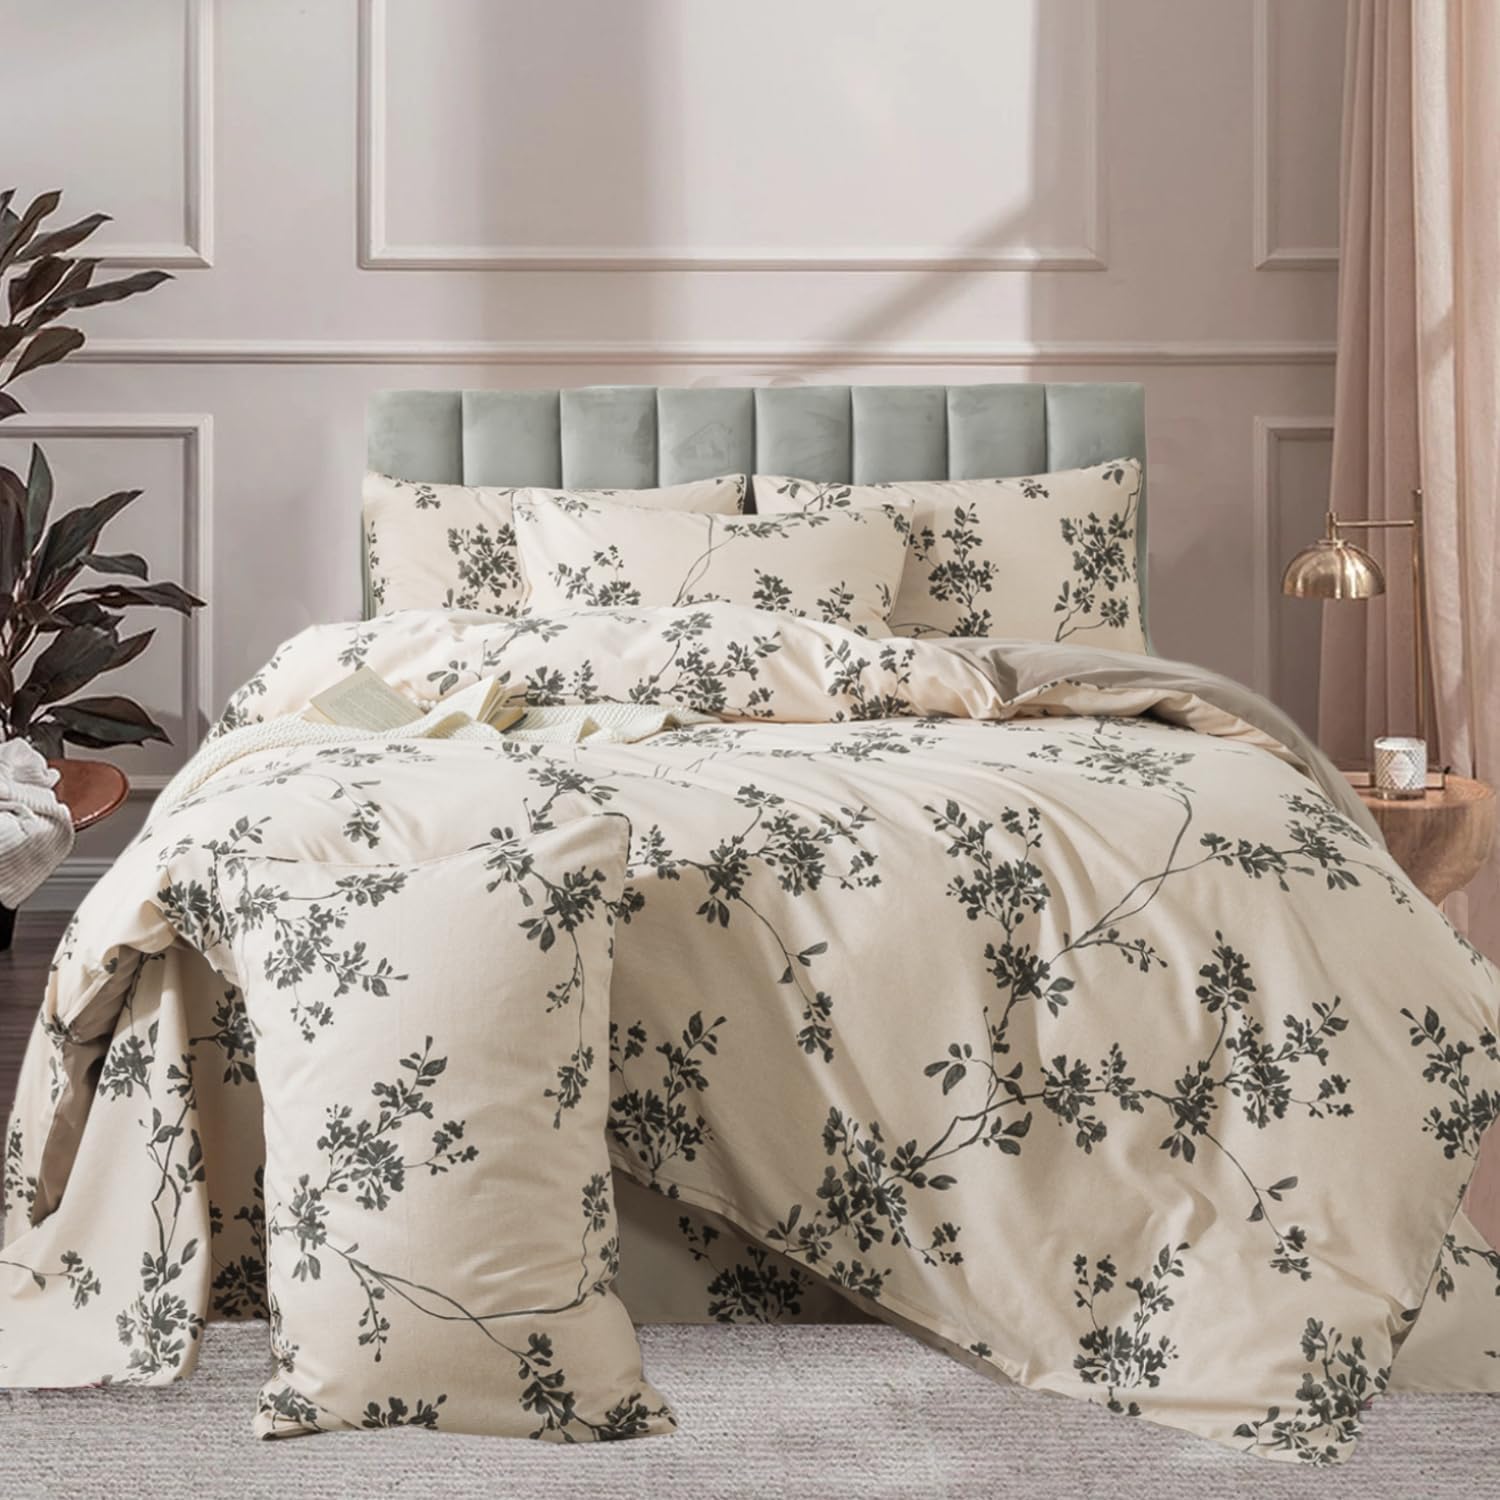 FADFAY Floral Duvet Cover Set Queen Size 100% Brushed Cotton Shabby Branch Flower Pattern Bedding Reversible Brown Vintage Comforter Cover, Soft, Breathable Zipper Closure, 3 Pcs, Queen